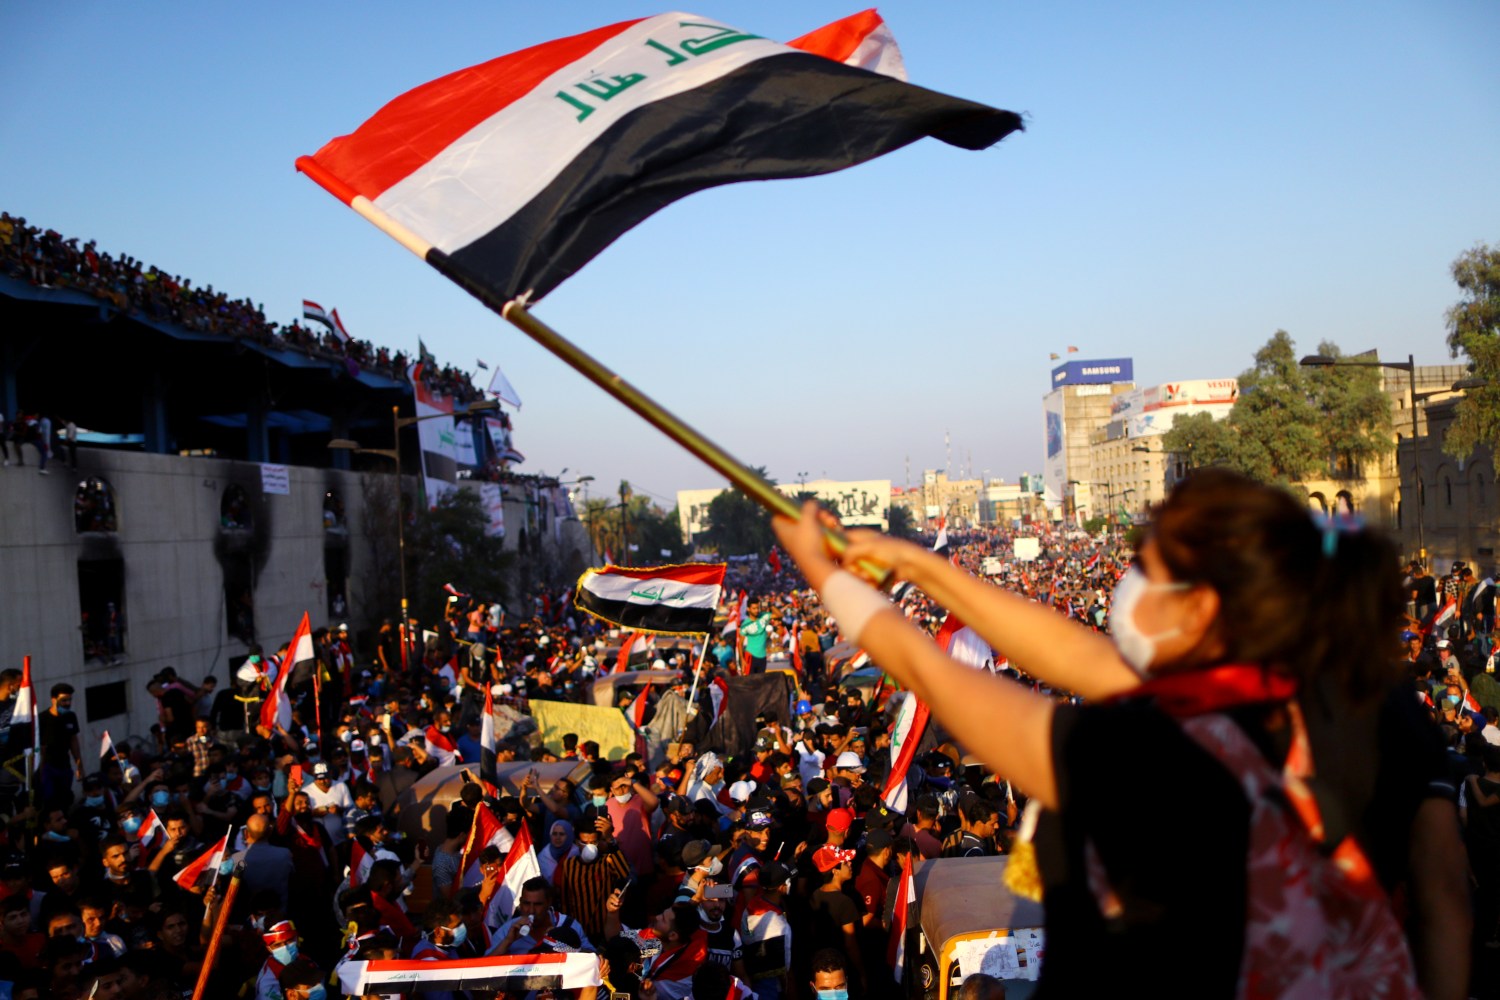 An Iraqi female demonstrator waves an Iraqi flag during an ongoing anti-government protest, in Baghdad, Iraq November 1, 2019. REUTERS/Ahmed Jadallah - RC164BCA0C20